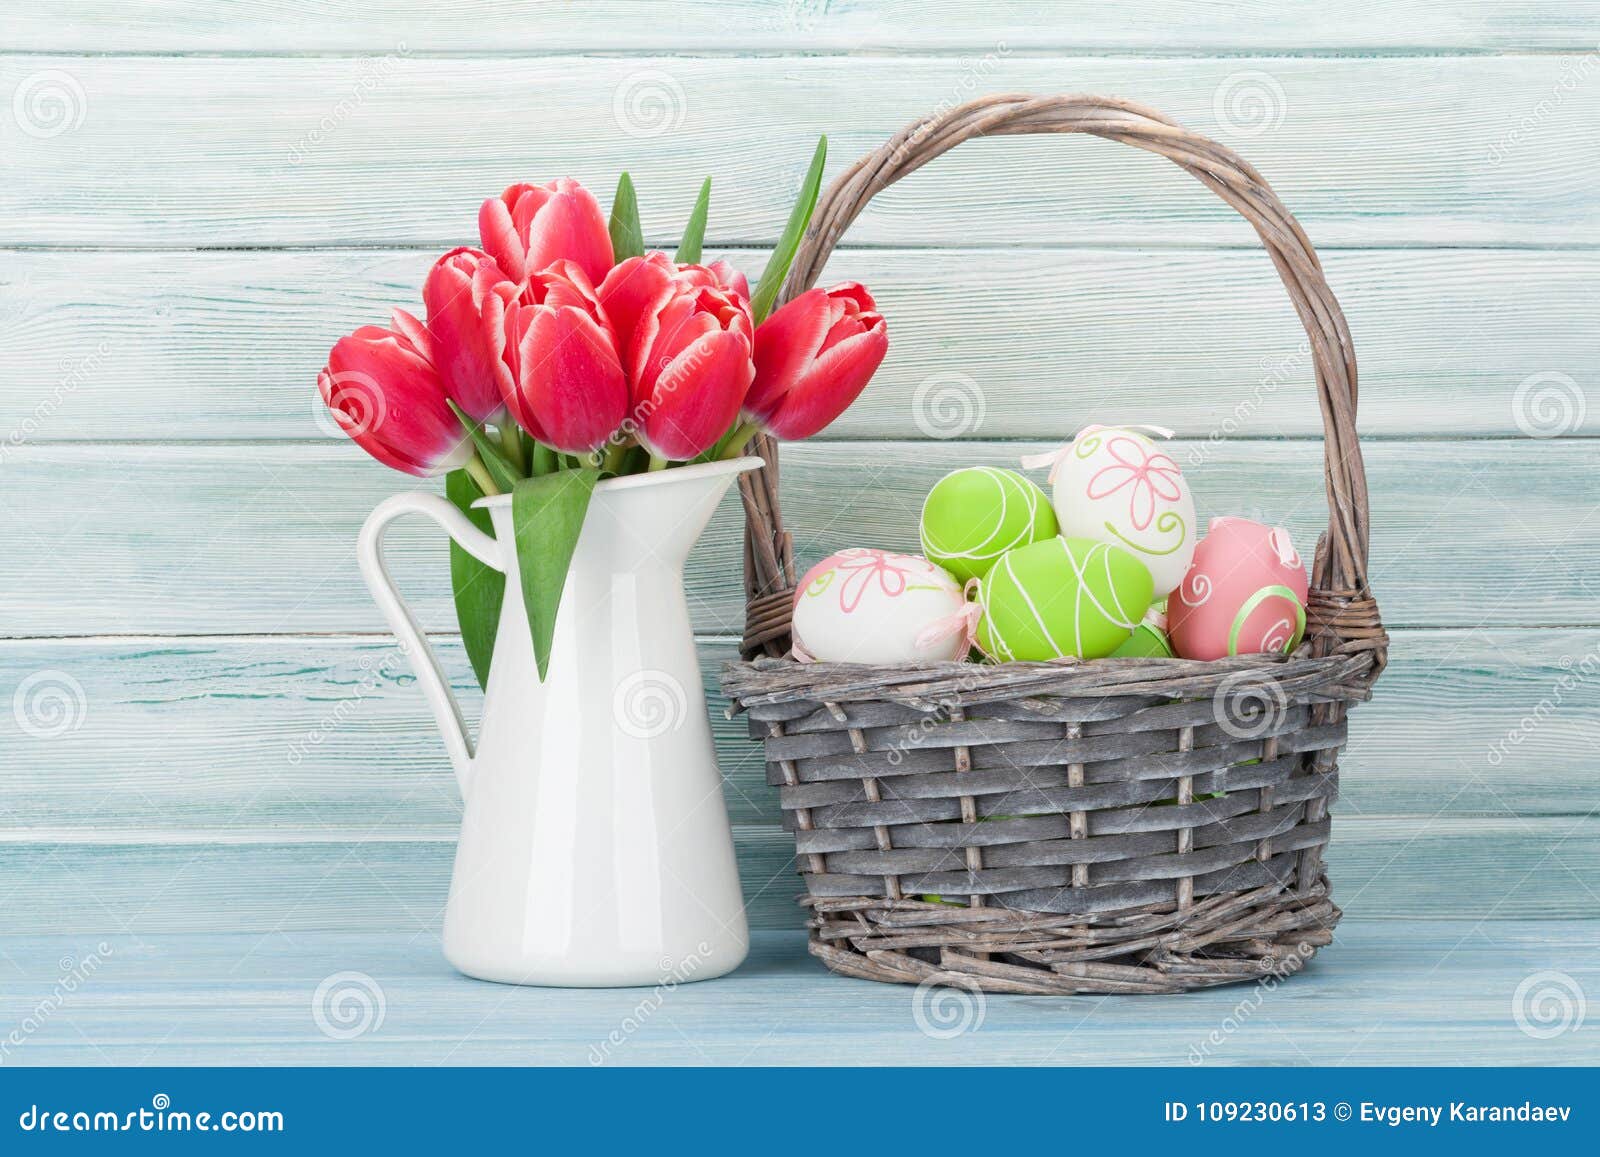 Red Tulip Flowers and Easter Eggs Stock Image - Image of tulip, green ...